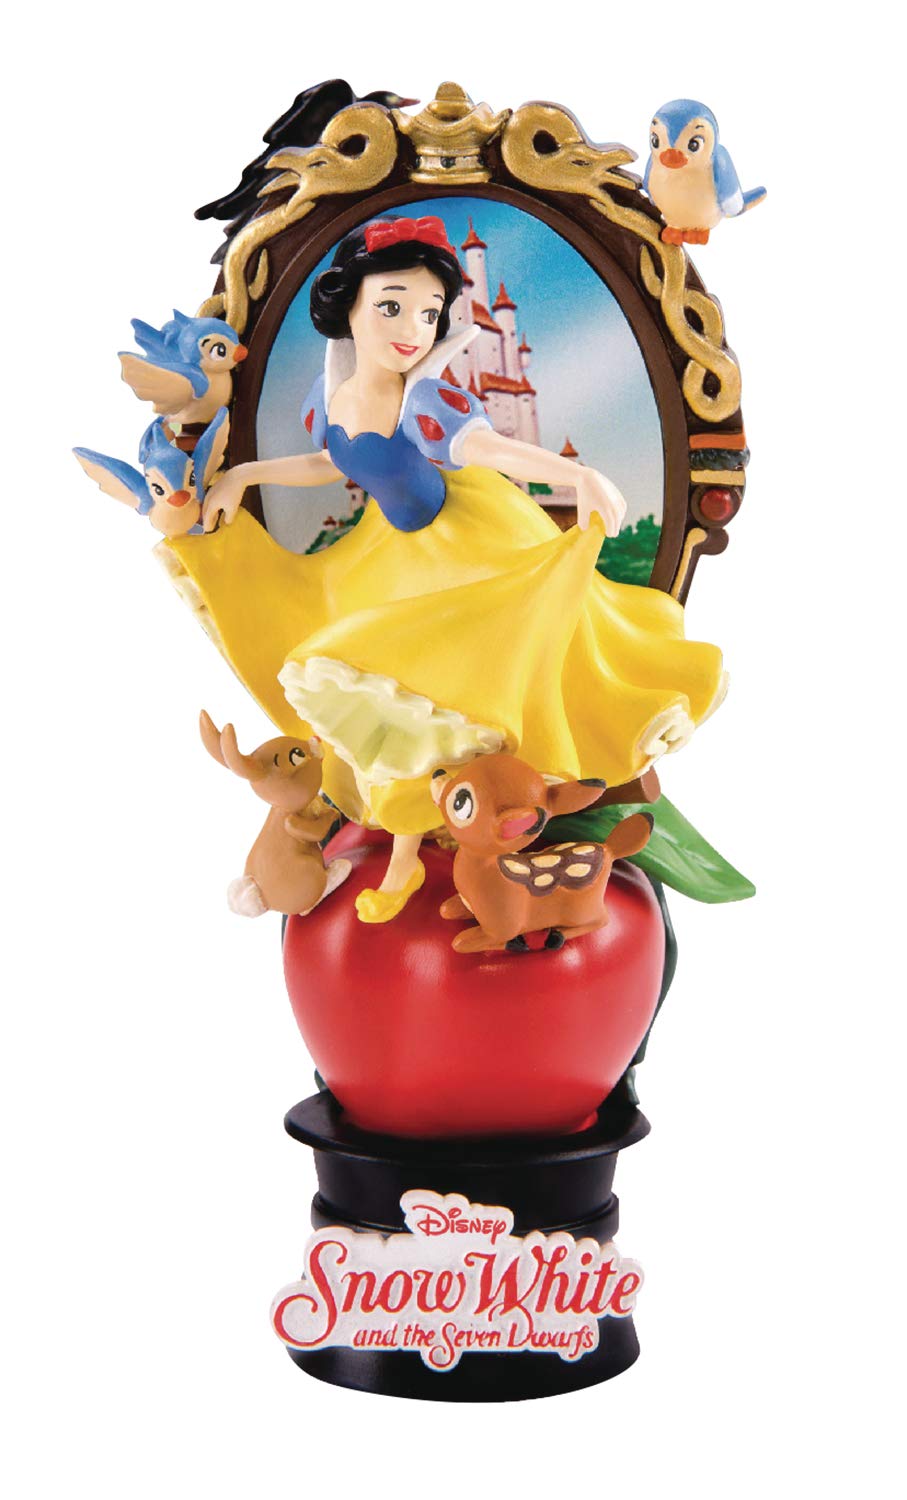 Beast Kingdom DS-013 Disney Snow White and the Seven Dwarfs Diorama Stage D-Stage Figure Statue